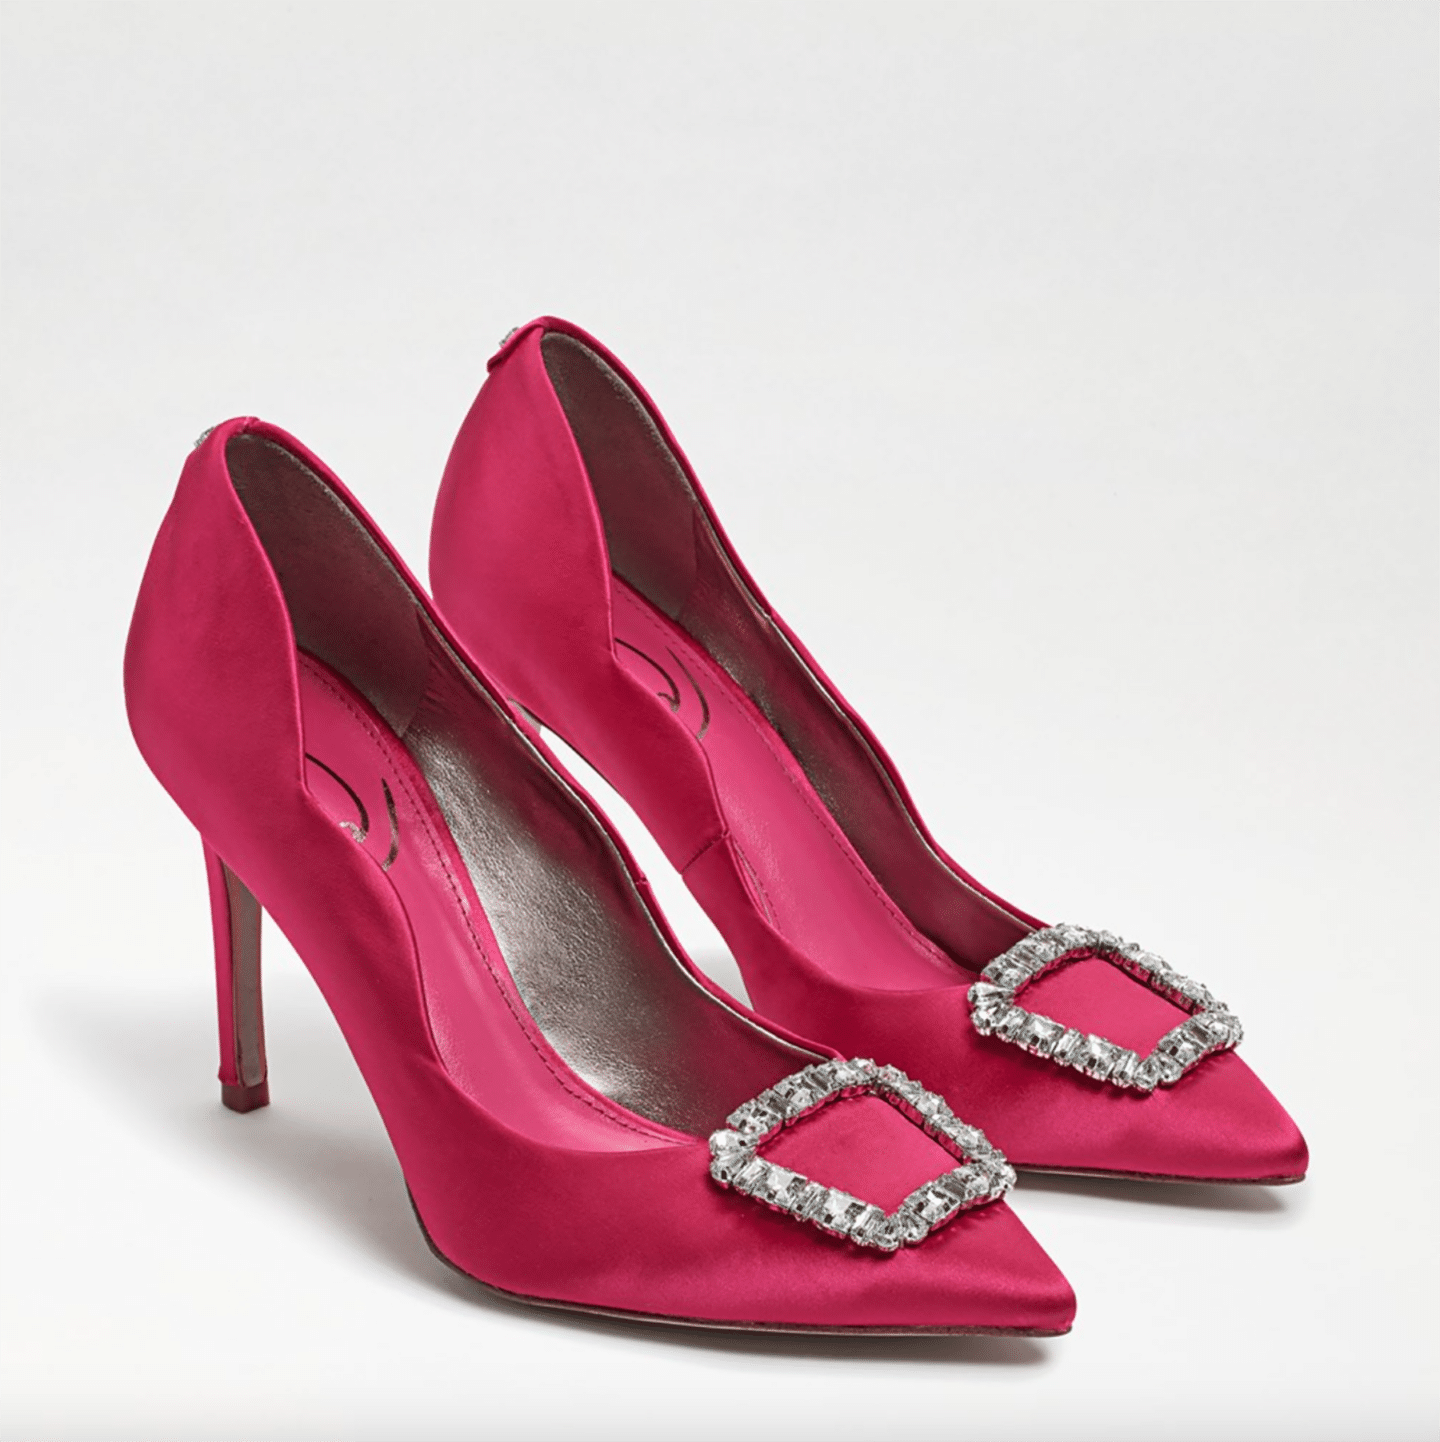 Fashionable Manolo Blahnik dupes, by fashion blogger What The Fab